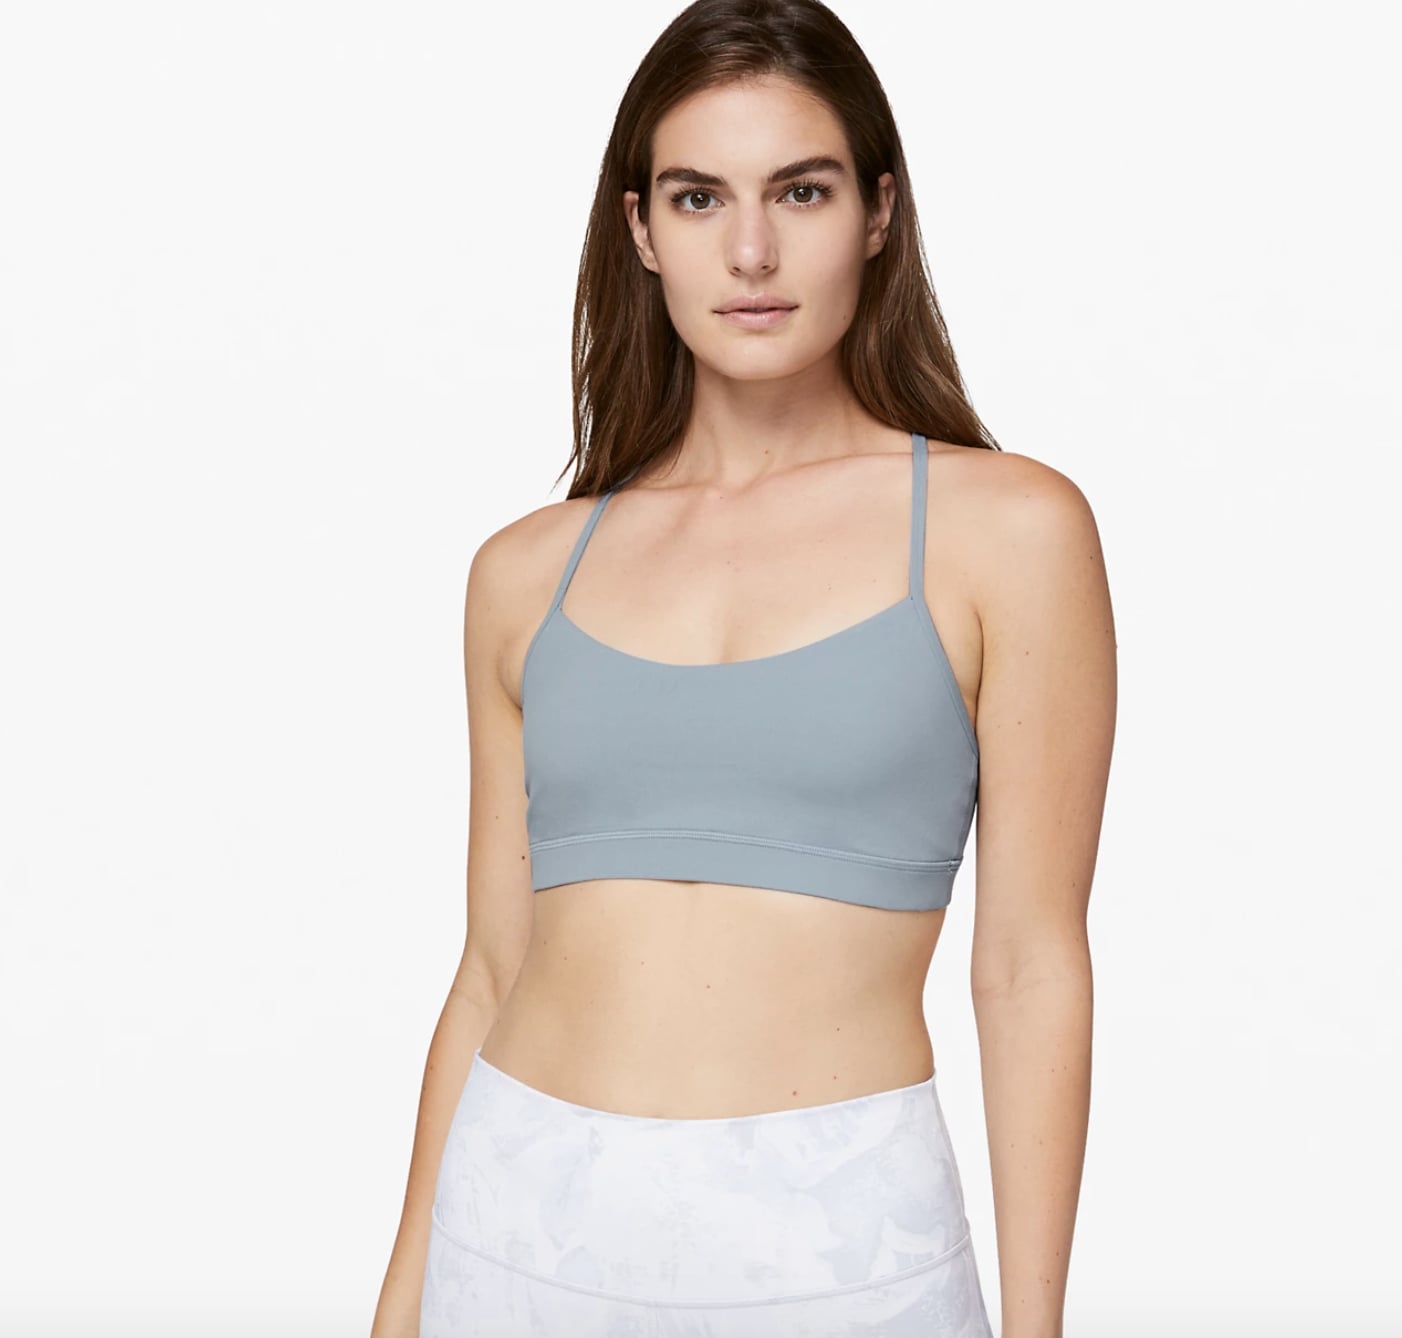 Lululemon Flow Y Bra Nulu Light Support, I Have a Small Bust and Never  Thought I Needed a Sports Bra, Until I Found This One